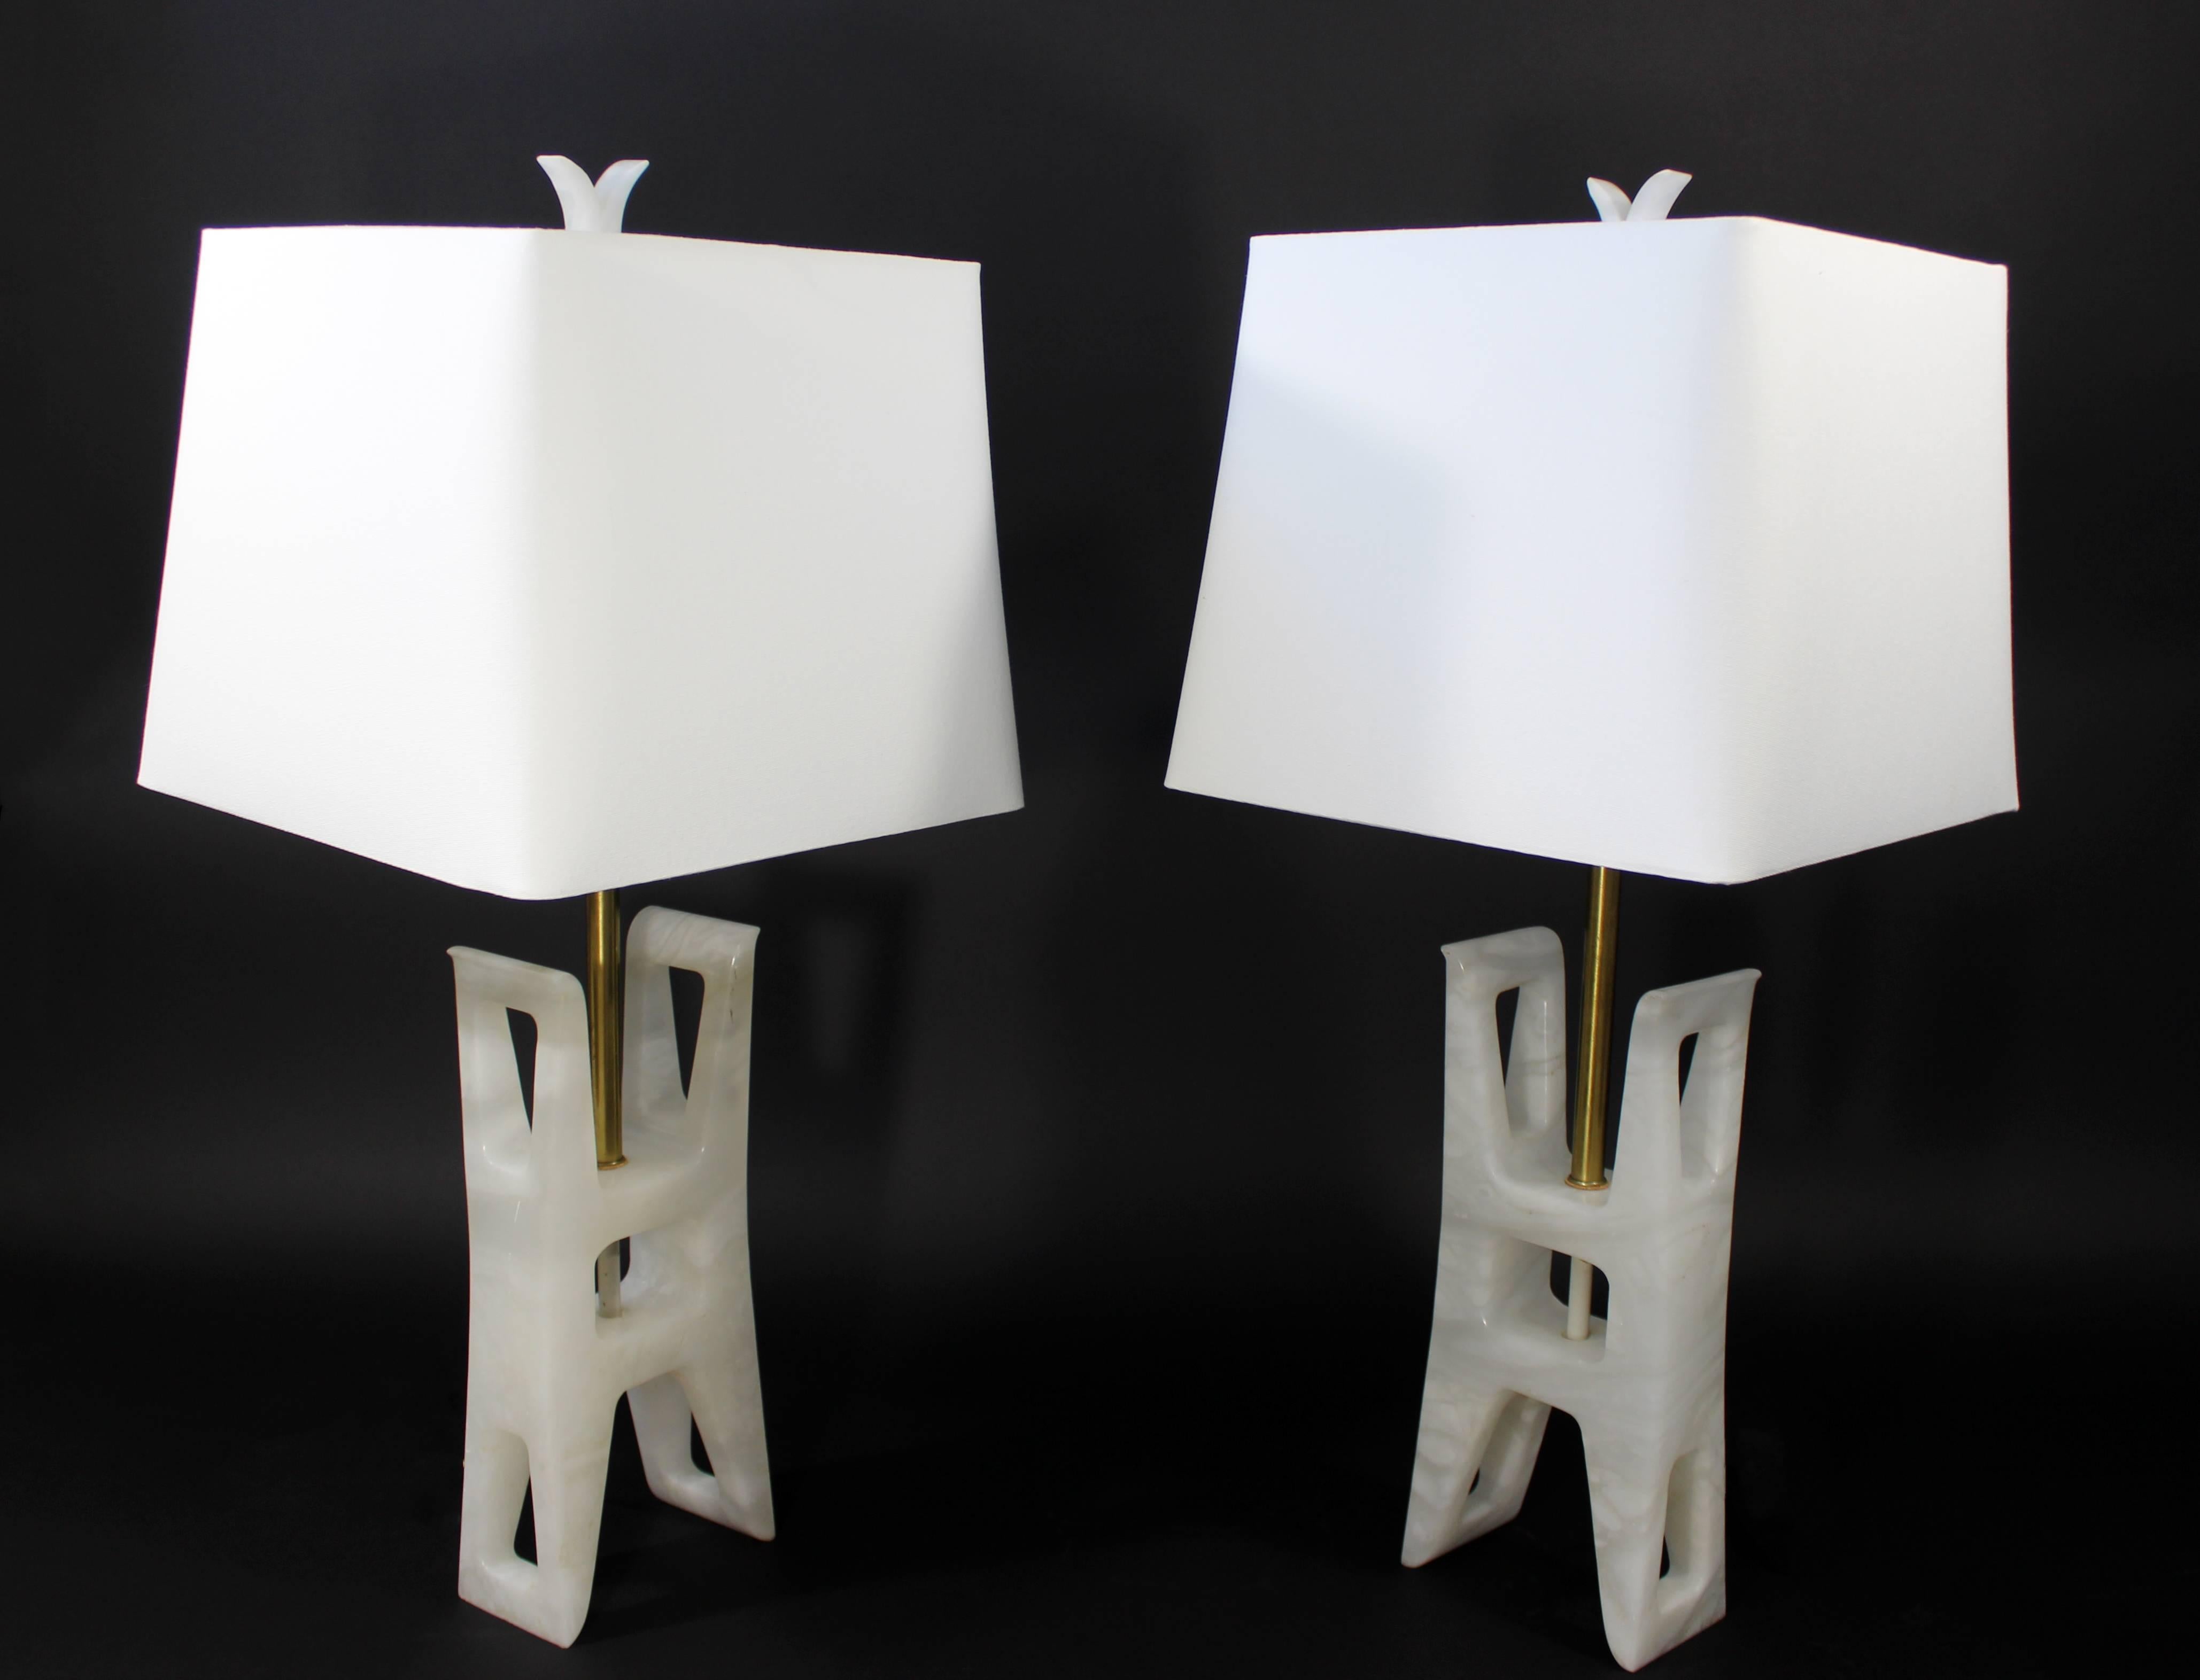 For your consideration is a stunningly beautiful and incredibly rare pair of white alabaster and brass table lamps, with their original shades and finials by Maurizio Tempestini for Lightolier. In excellent condition. The dimensions of the lamps are